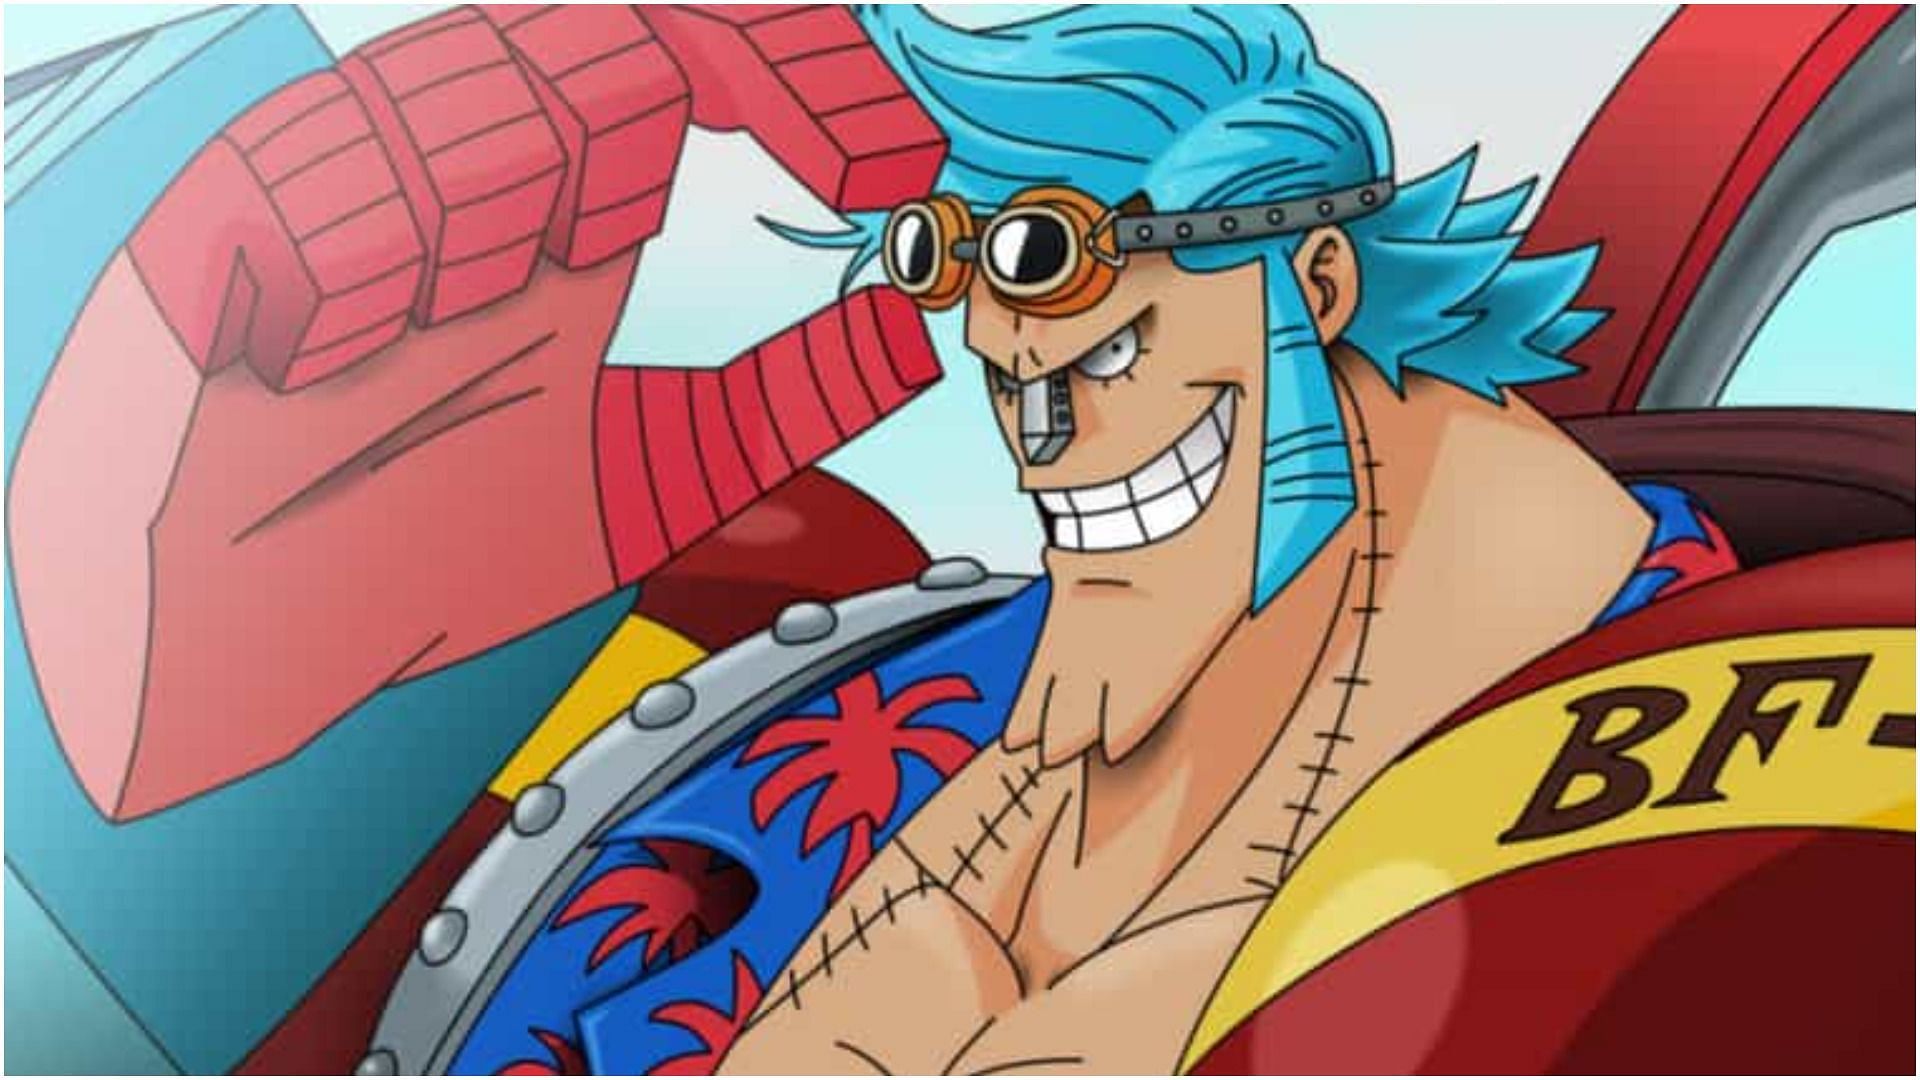 Franky as seen in the anime One Piece (Image via Toei Animation)